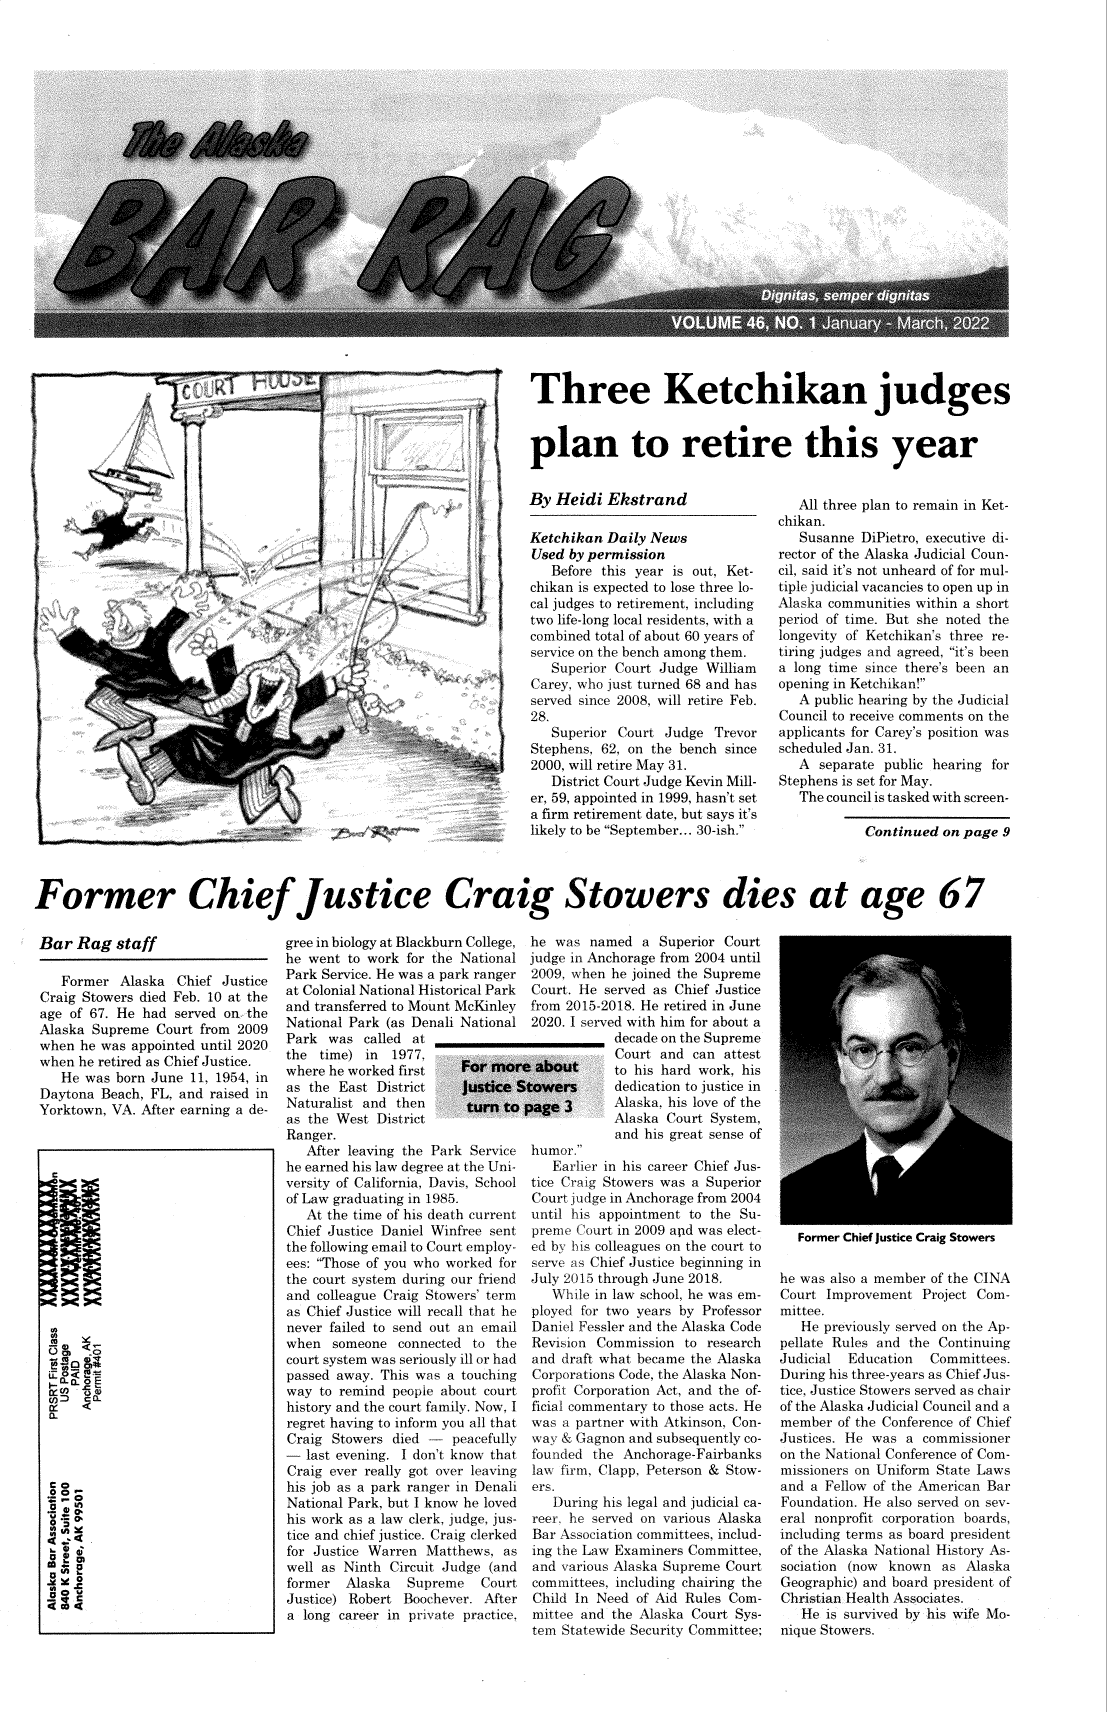 handle is hein.barjournals/askabar0046 and id is 1 raw text is: Three Ketchikan judges
plan to retire this year

By Heidi Ekstrand

Ketchikan Daily News
Used by permission
Before this year is out, Ket-
chikan is expected to lose three lo-
cal judges to retirement, including
two life-long local residents, with a
combined total of about 60 years of
service on the bench among them.
Superior Court Judge William
Carey, who just turned 68 and has
served since 2008, will retire Feb.
28.
Superior Court Judge Trevor
Stephens, 62, on the bench since
2000, will retire May 31.
District Court Judge Kevin Mill-
er, 59, appointed in 1999, hasn't set
a firm retirement date, but says it's
likely to be September... 30-ish.

All three plan to remain in Ket-
chikan.
Susanne DiPietro, executive di-
rector of the Alaska Judicial Coun-
cil, said it's not unheard of for mul-
tiple judicial vacancies to open up in
Alaska communities within a short
period of time. But she noted the
longevity of Ketchikan's three re-
tiring judges and agreed, it's been
a long time since there's been an
opening in Ketchikan!
A public hearing by the Judicial
Council to receive comments on the
applicants for Carey's position was
scheduled Jan. 31.
A separate public hearing for
Stephens is set for May.
The council is tasked with screen-
Continued on page 9

Former Chief Justice Craig Stowers dies at age 67

Bar Rag staff
Former Alaska Chief Justice
Craig Stowers died Feb. 10 at the
age of 67. He had served on the
Alaska Supreme Court from 2009
when he was appointed until 2020
when he retired as Chief Justice.
He was born June 11, 1954, in
Daytona Beach, FL, and raised in
Yorktown, VA. After earning a de-

gree in biology at Blackburn College,
he went to work for the National
Park Service. He was a park ranger
at Colonial National Historical Park
and transferred to Mount McKinley
National Park (as Denali National
Park was called at
the time) in  1977,
where he worked first   For more
as the East District    justice S
Naturalist and then     turn to
as the West District
Ranger.
After leaving the Park Service
he earned his law degree at the Uni-
versity of California, Davis, School
of Law graduating in 1985.
At the time of his death current
Chief Justice Daniel Winfree sent
the following email to Court employ-
ees: Those of you who worked for
the court system during our friend
and colleague Craig Stowers' term
as Chief Justice will recall that he
never failed to send out an email
when someone connected to the
court system was seriously ill or had
passed away. This was a touching
way to remind people about court
history and the court family. Now, I
regret having to inform you all that
Craig Stowers died - peacefully
- last evening. I don't know that
Craig ever really got over leaving
his job as a park ranger in Denali
National Park, but I know he loved
his work as a law clerk, judge, jus-
tice and chief justice. Craig clerked
for Justice Warren Matthews, as
well as Ninth Circuit Judge (and
former  Alaska  Supreme    Court
Justice) Robert Boochever. After
a long career in private practice,

he was named a Superior Court
judge in Anchorage from 2004 until
2009, when he joined the Supreme
Court. He served as Chief Justice
from 2015-2018. He retired in June
2020. I served with him for about a
decade on the Supreme
Court and can attest
Sabout     to his hard work, his
towers      dedication to justice in
page 3      Alaska, his love of the
Alaska Court System,
and his great sense of
humor.
Earlier in his career Chief Jus-
tice Craig Stowers was a Superior
Court judge in Anchorage from 2004
until his appointment to the Su-
preme Court in 2009 and was elect-
ed by his colleagues on the court to
serve as Chief Justice beginning in
July 2015 through June 2018.
While in law school, he was em-
ployed for two years by Professor
Daniel Fessler and the Alaska Code
Revision Commission to research
and draft what became the Alaska
Corporations Code, the Alaska Non-
profit Corporation Act, and the of-
ficial commentary to those acts. He
was a partner with Atkinson, Con-
way & Gagnon and subsequently co-
founded the Anchorage-Fairbanks
law firm, Clapp, Peterson & Stow-
ers.
During his legal and judicial ca-
reer, he served on various Alaska
Bar Association committees, includ-
ing the Law Examiners Committee,
and various Alaska Supreme Court
committees, including chairing the
Child In Need of Aid Rules Com-
mittee and the Alaska Court Sys-
tem Statewide Security Committee;

Former Chief Justice Craig Stowers
he was also a member of the CINA
Court Improvement Project Com-
mittee.
He previously served on the Ap-
pellate Rules and the Continuing
Judicial  Education  Committees.
During his three-years as Chief Jus-
tice, Justice Stowers served as chair
of the Alaska Judicial Council and a
member of the Conference of Chief
Justices. He was a commissioner
on the National Conference of Com-
missioners on Uniform State Laws
and a Fellow of the American Bar
Foundation. He also served on sev-
eral nonprofit corporation boards,
including terms as board president
of the Alaska National History As-
sociation (now known as Alaska
Geographic) and board president of
Christian Health Associates.
He is survived by his wife Mo-
nique Stowers.

t

cU
4d   <e
a. .
Co
0
Co
In
4 -a

AMON

M

_                   :
__-     u
. - ,
~
i
--
w N


